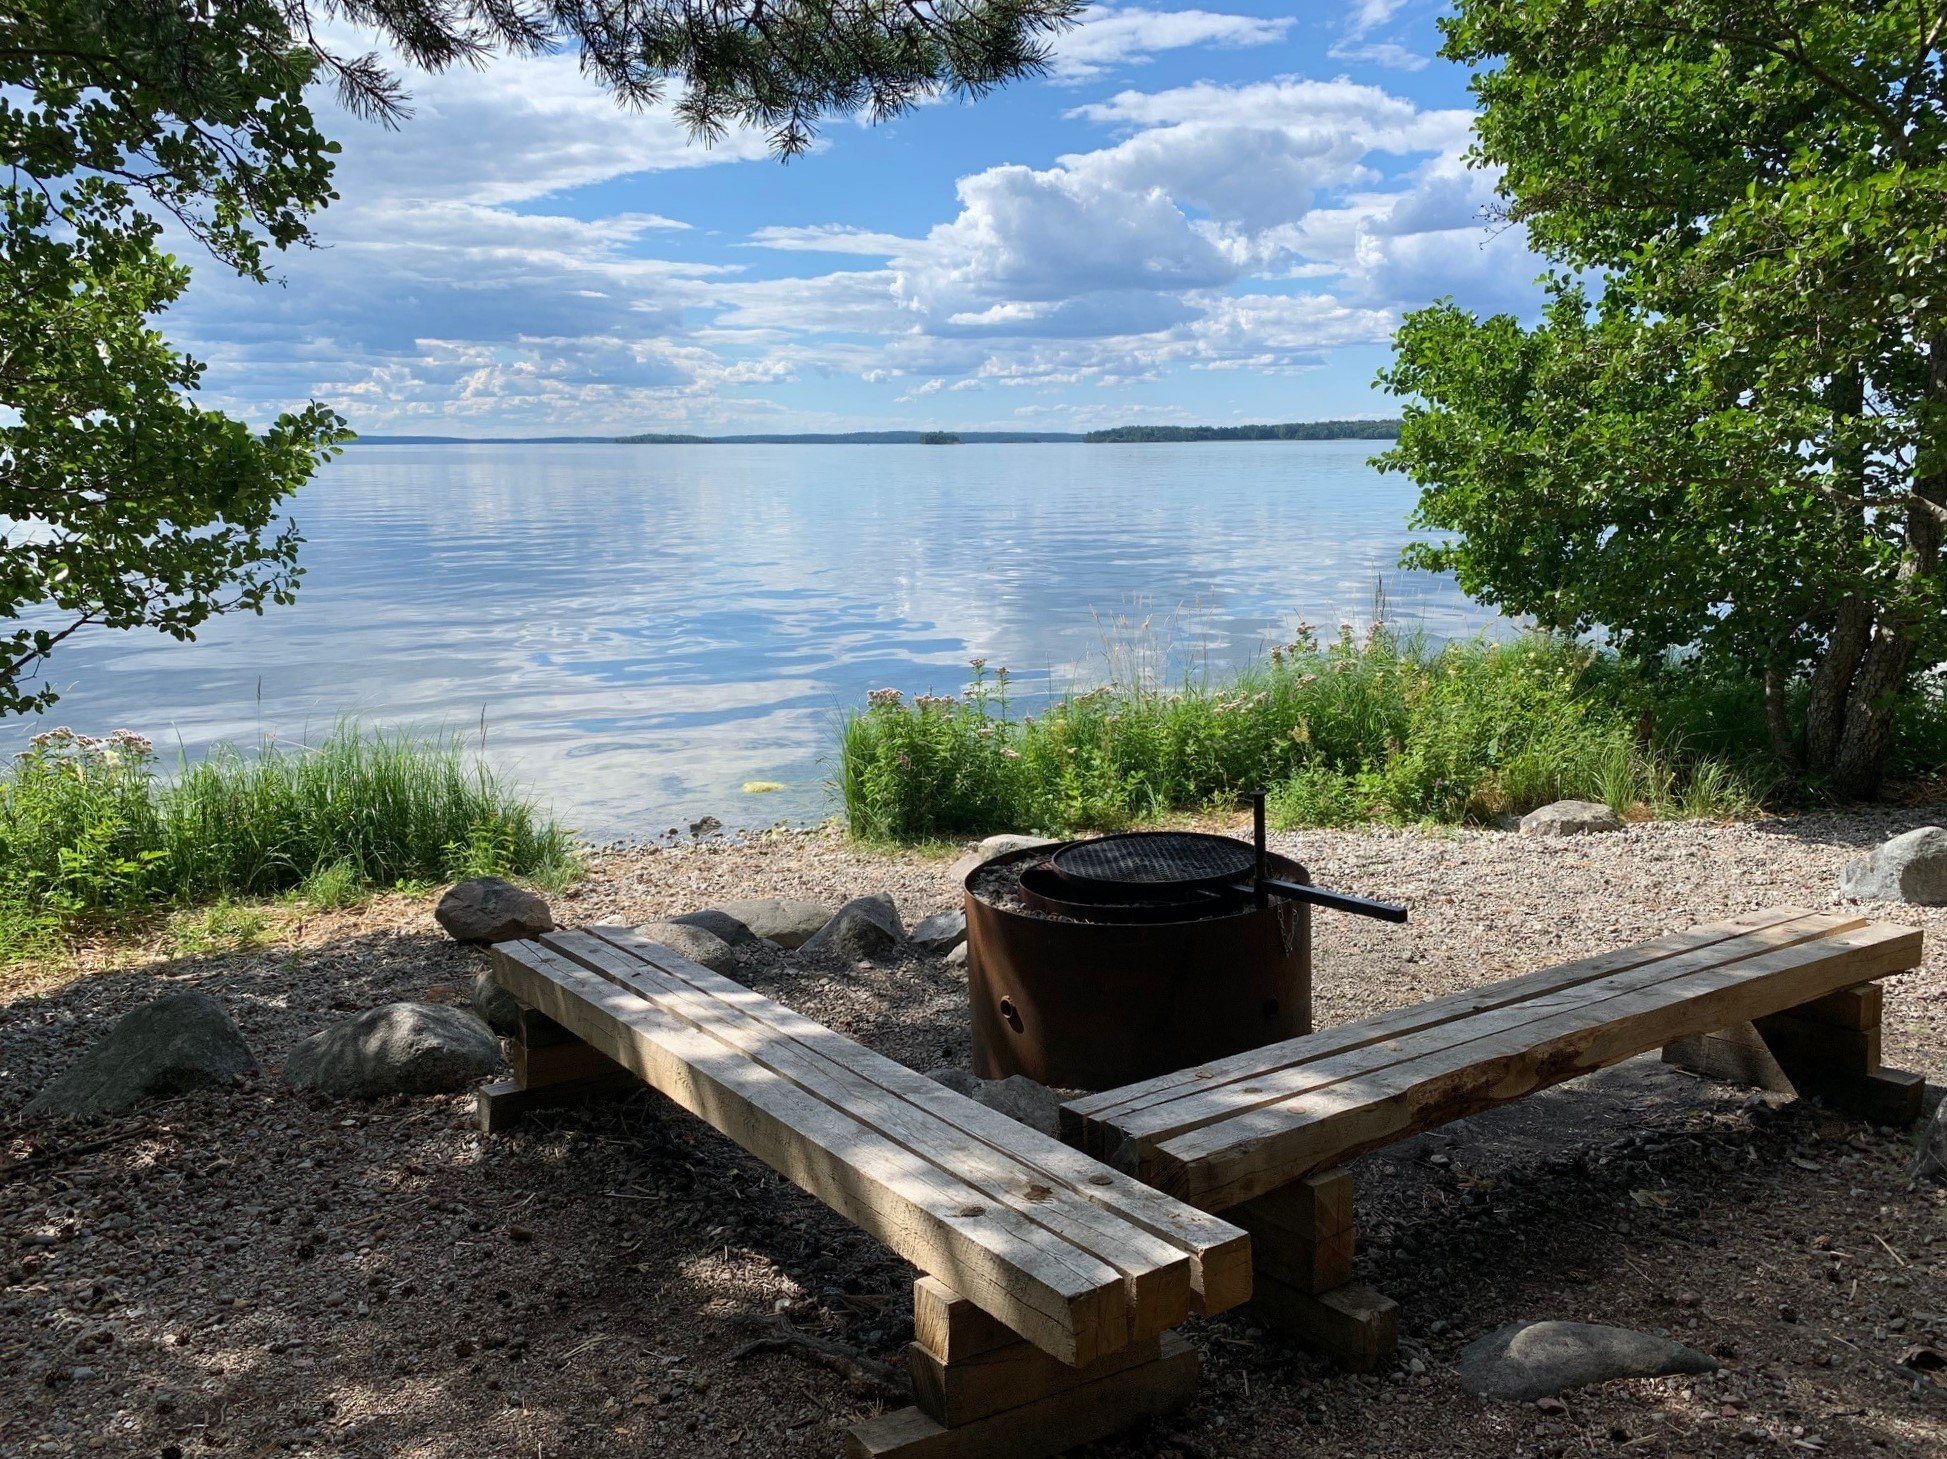 The picnic area has a firepit and a remarkable view over Lake Mälaren.